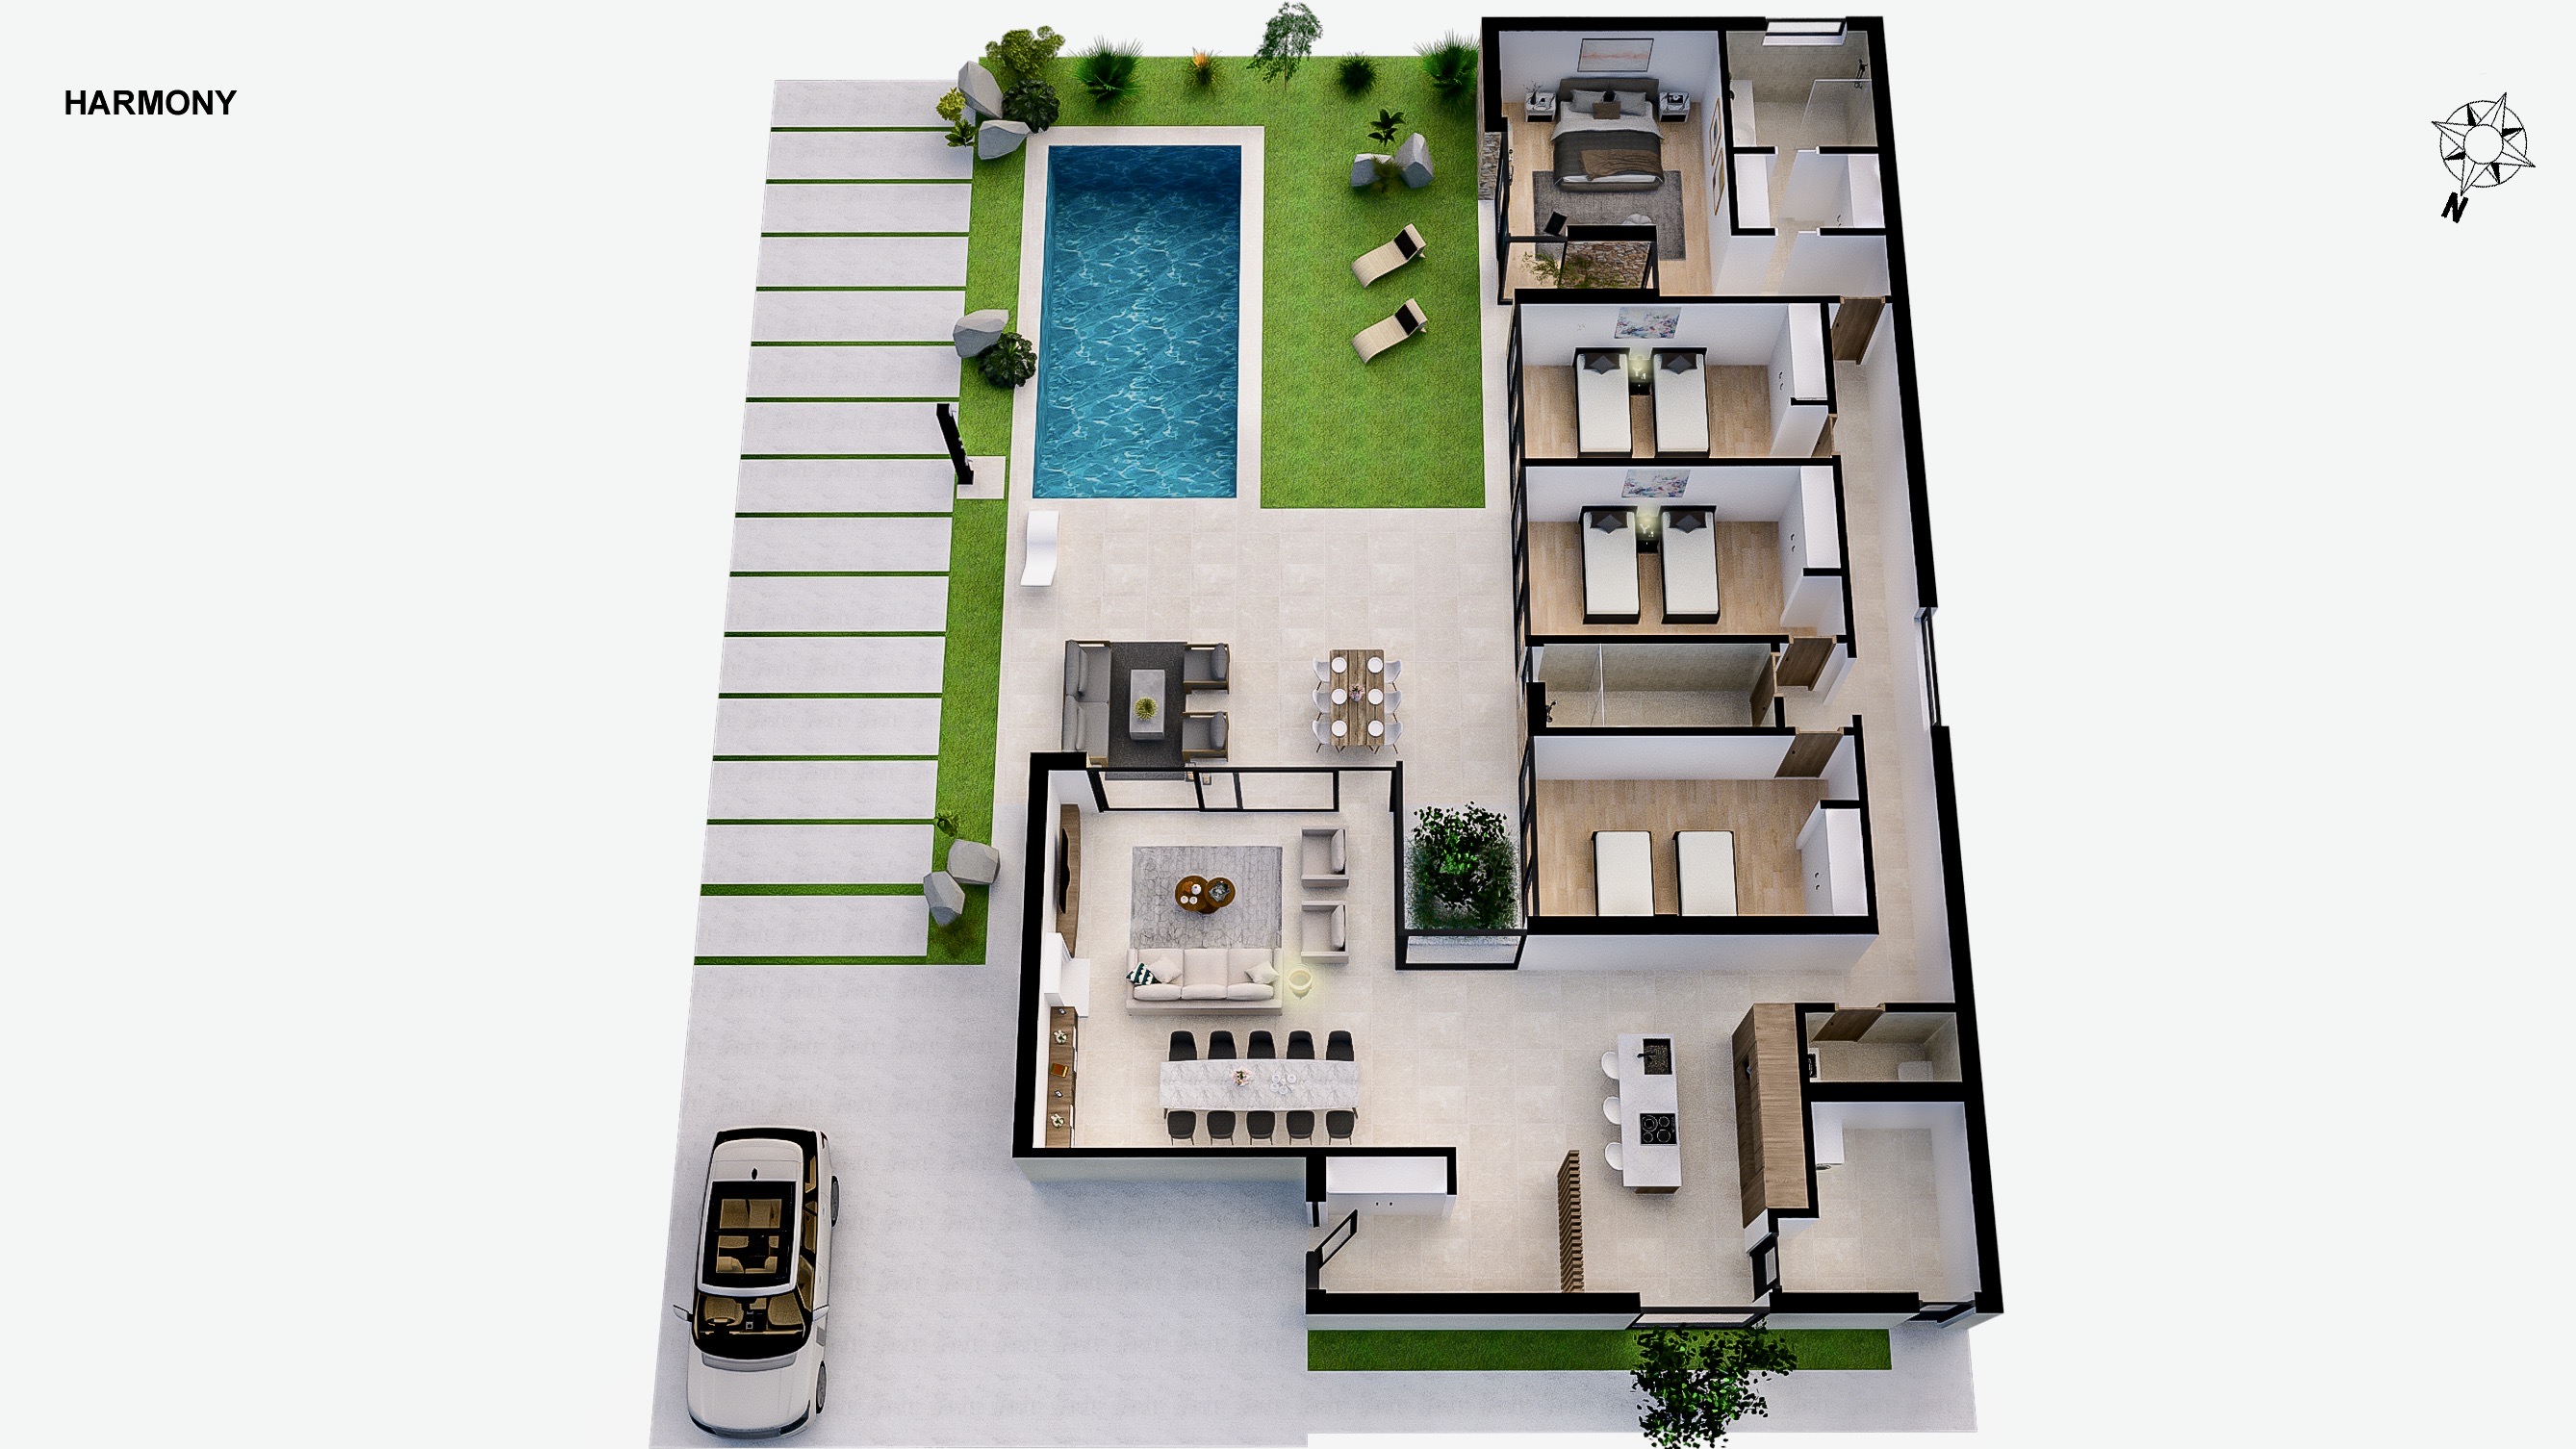 Floor plan for Luxury Villa ref 4132 for sale in Altaona Golf And Country Village Spain - Murcia Dreams